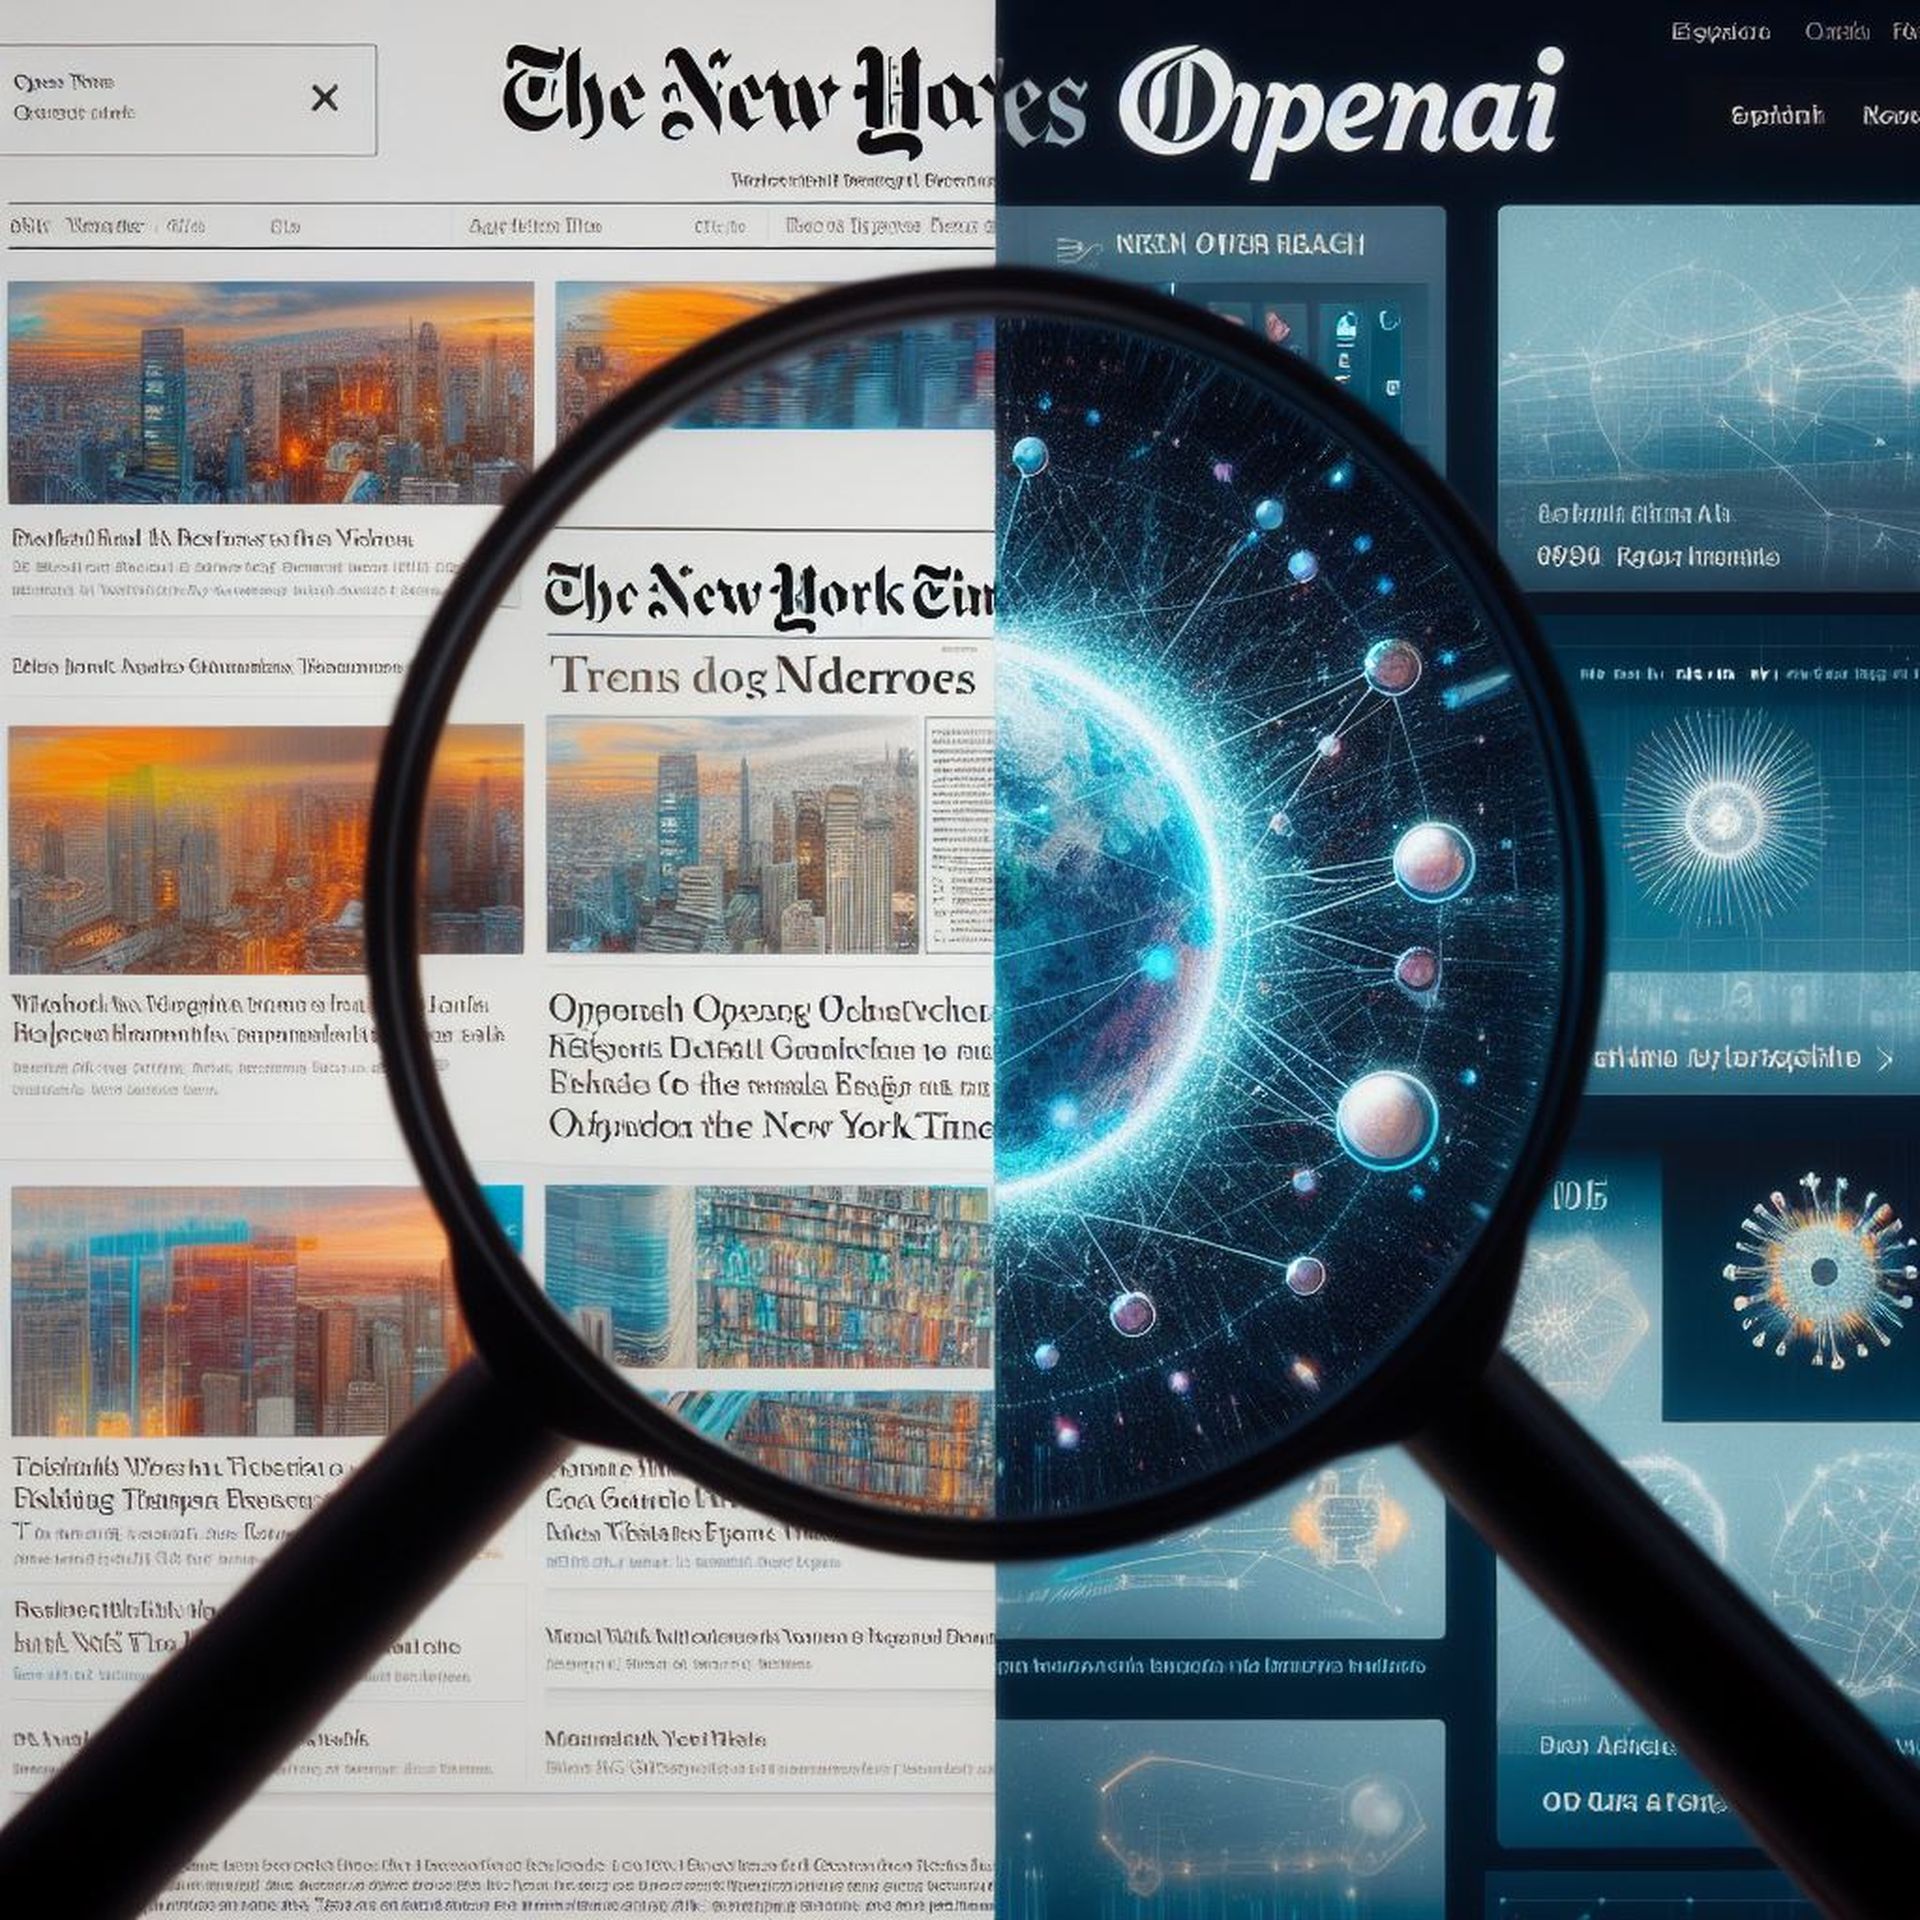 NYT sues OpenAI & Microsoft in groundbreaking lawsuit, alleging copyright infringement, AI competition, and industry implications. Explore now!